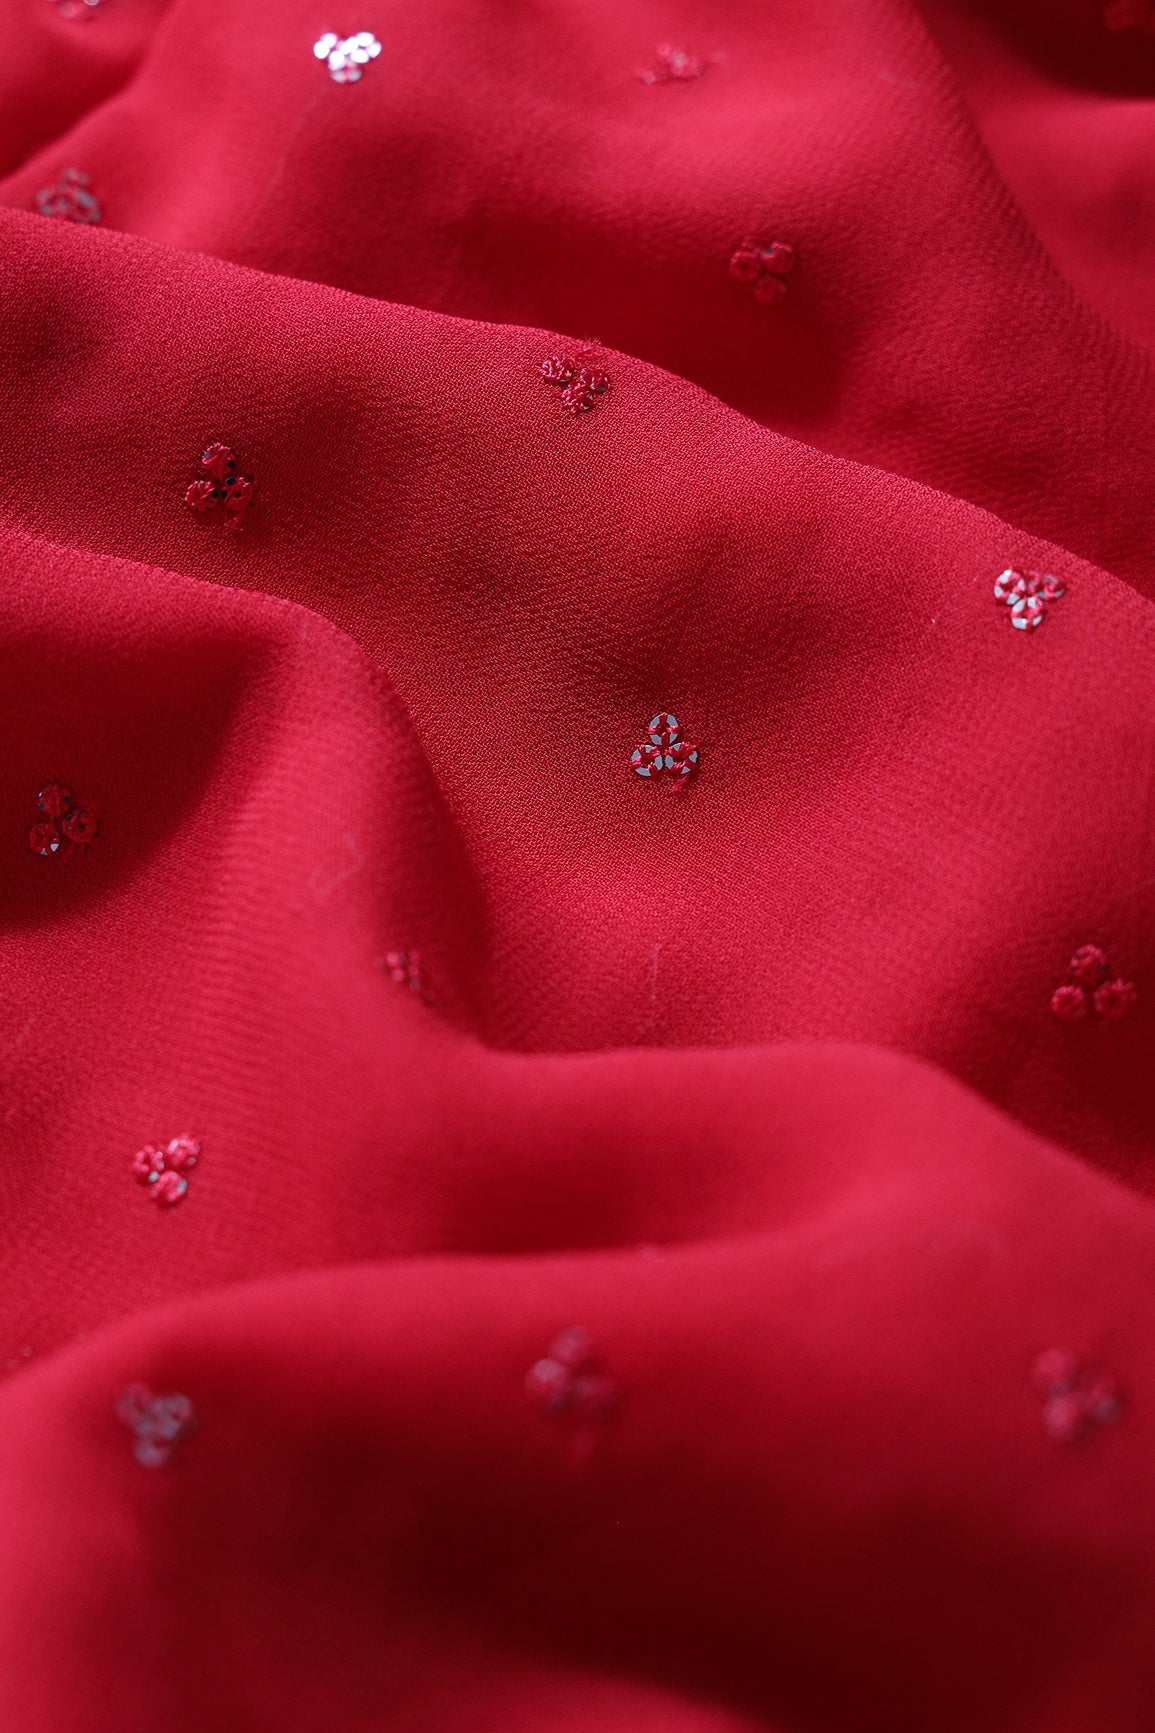 Small Motif Sequins Embroidery On Red Viscose Georgette Fabric - doeraa